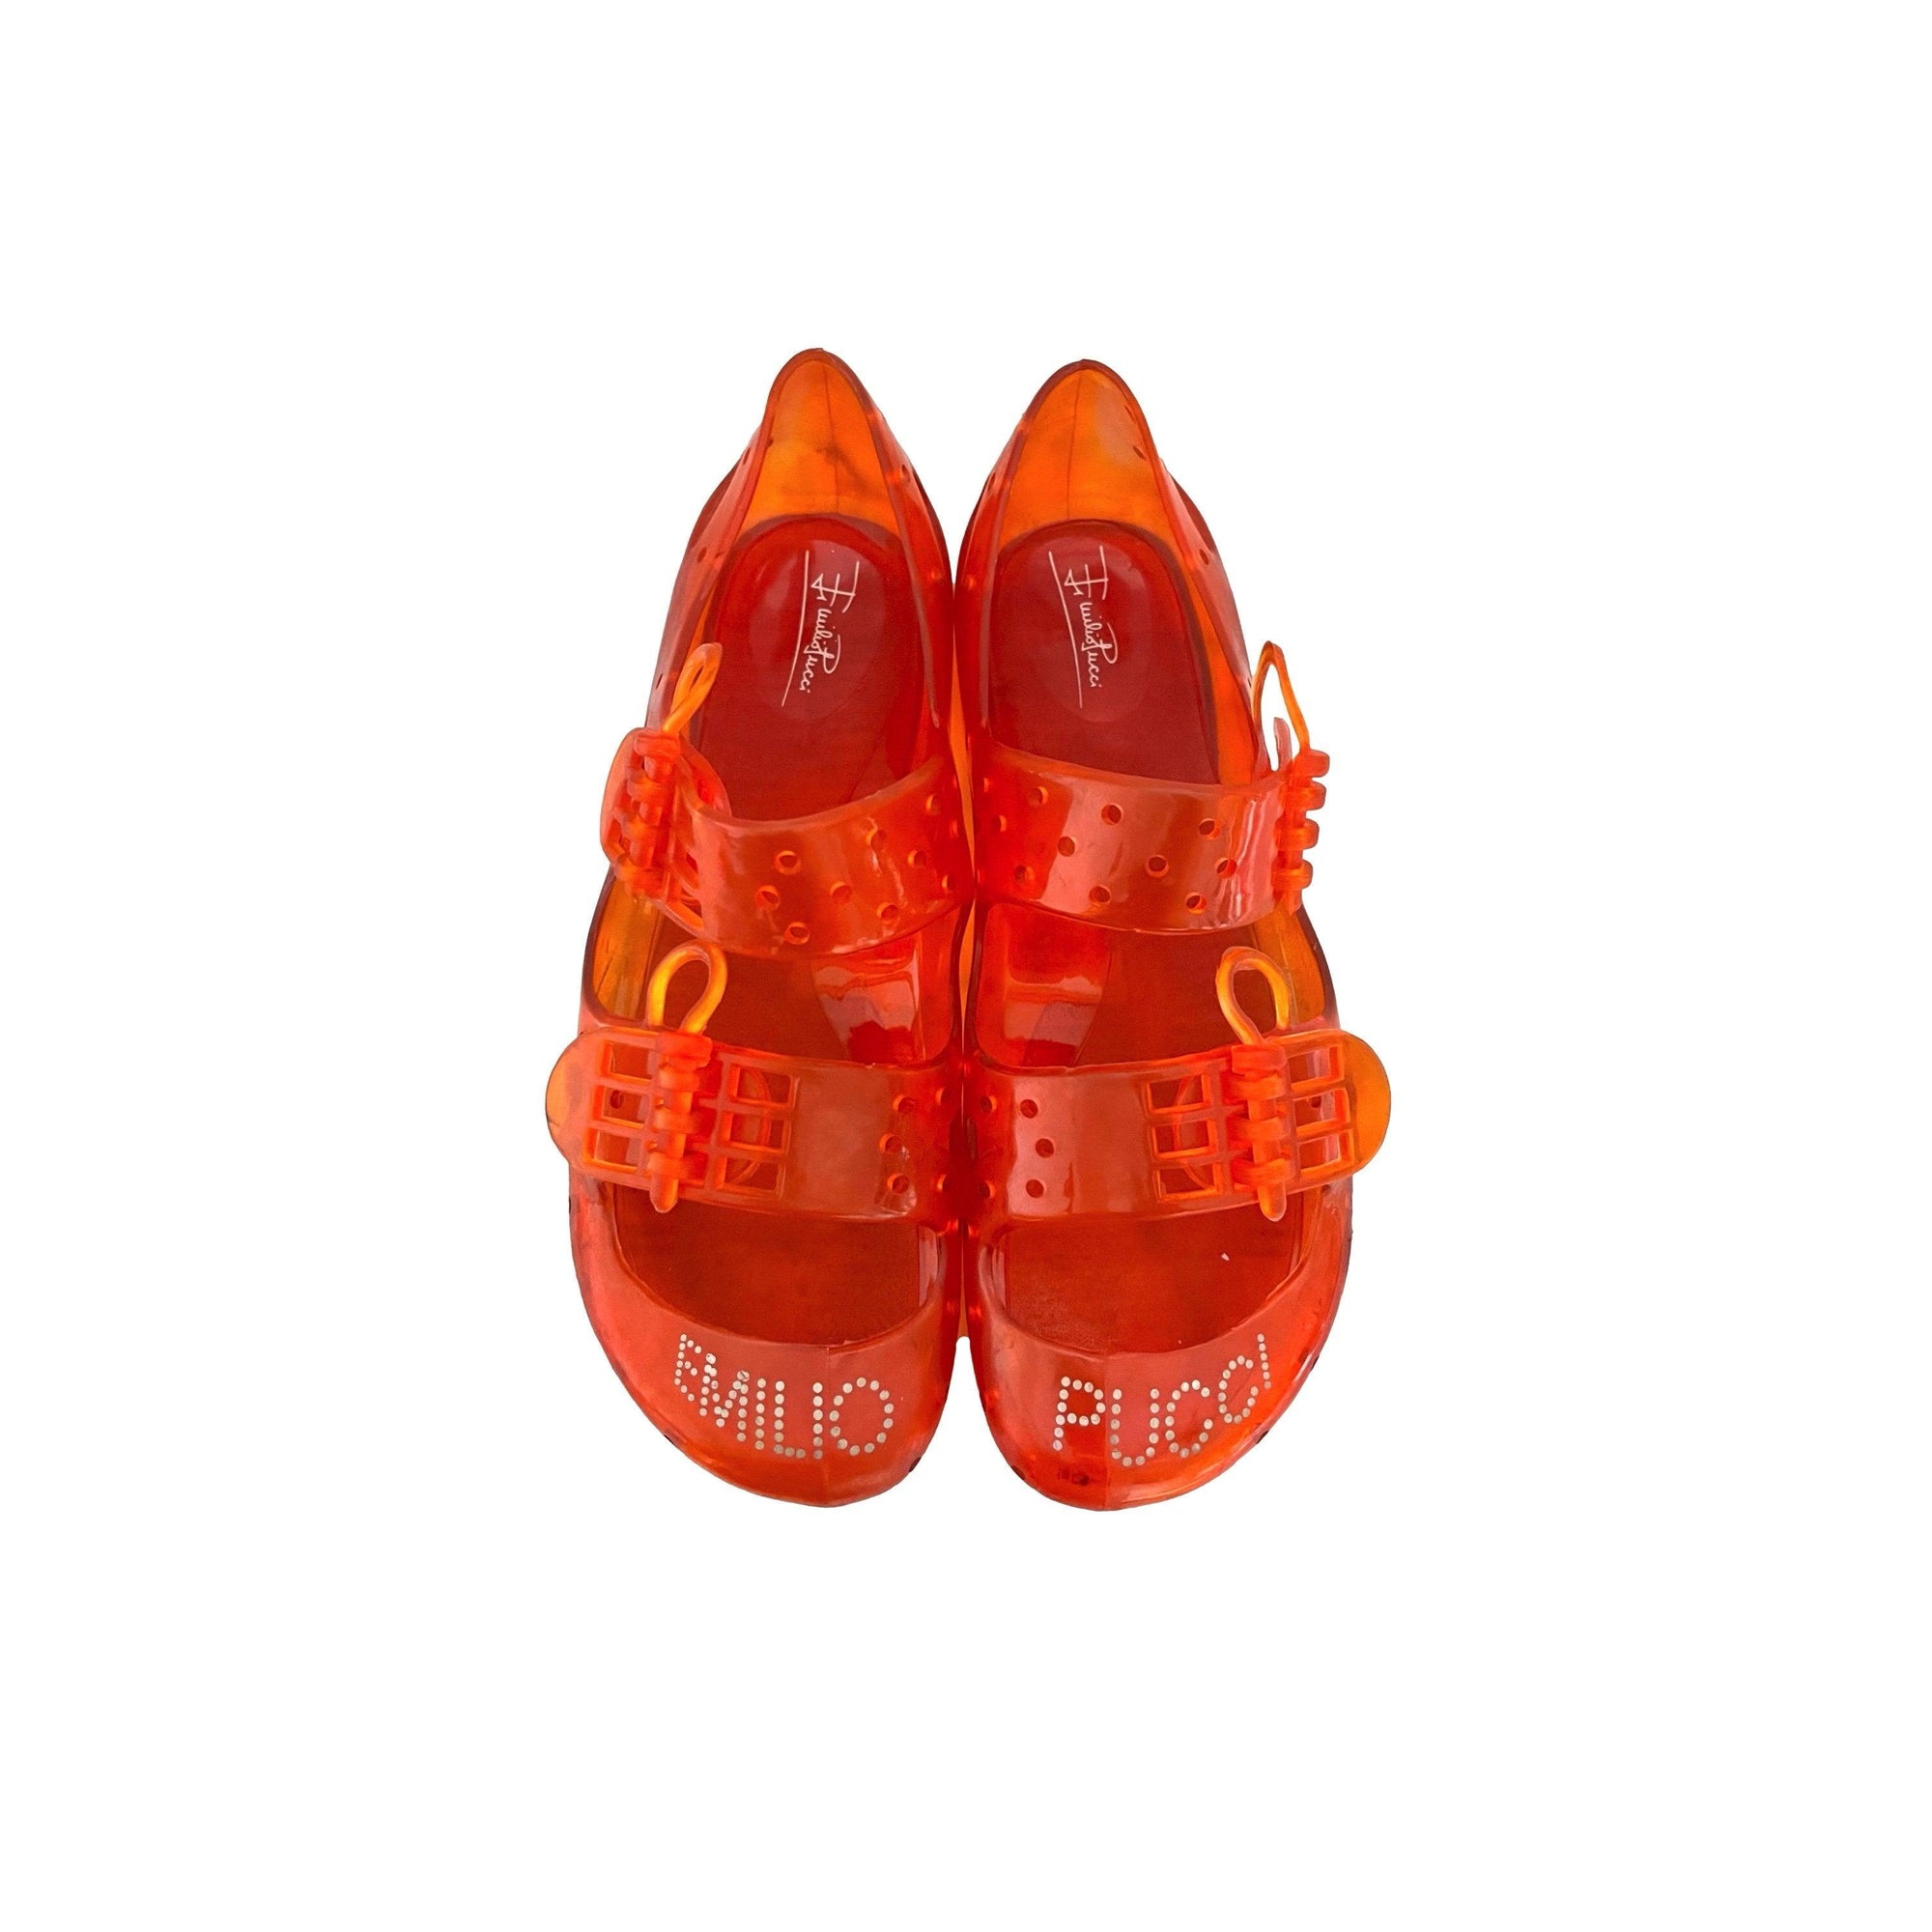 Pucci Orange Marmalade Jelly Shoes - Shoes